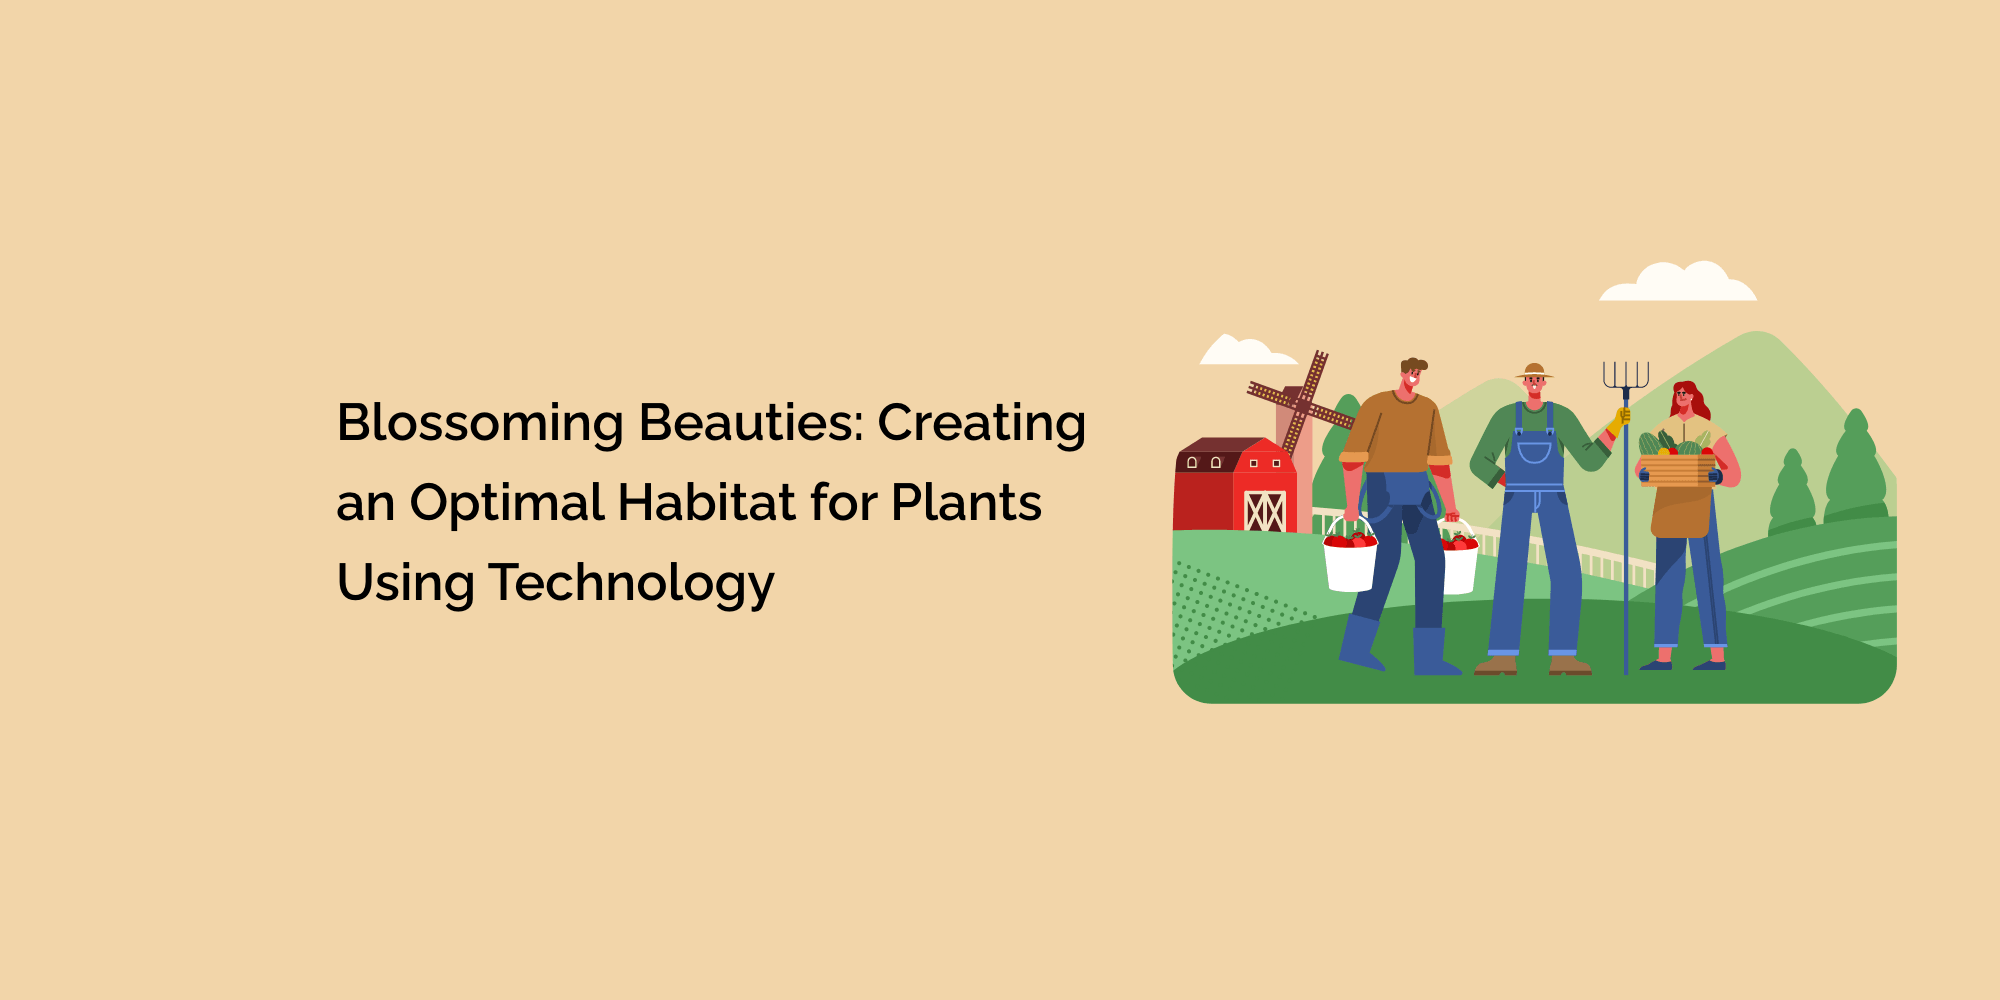 Blossoming Beauties: Creating an Optimal Habitat for Plants Using Technology